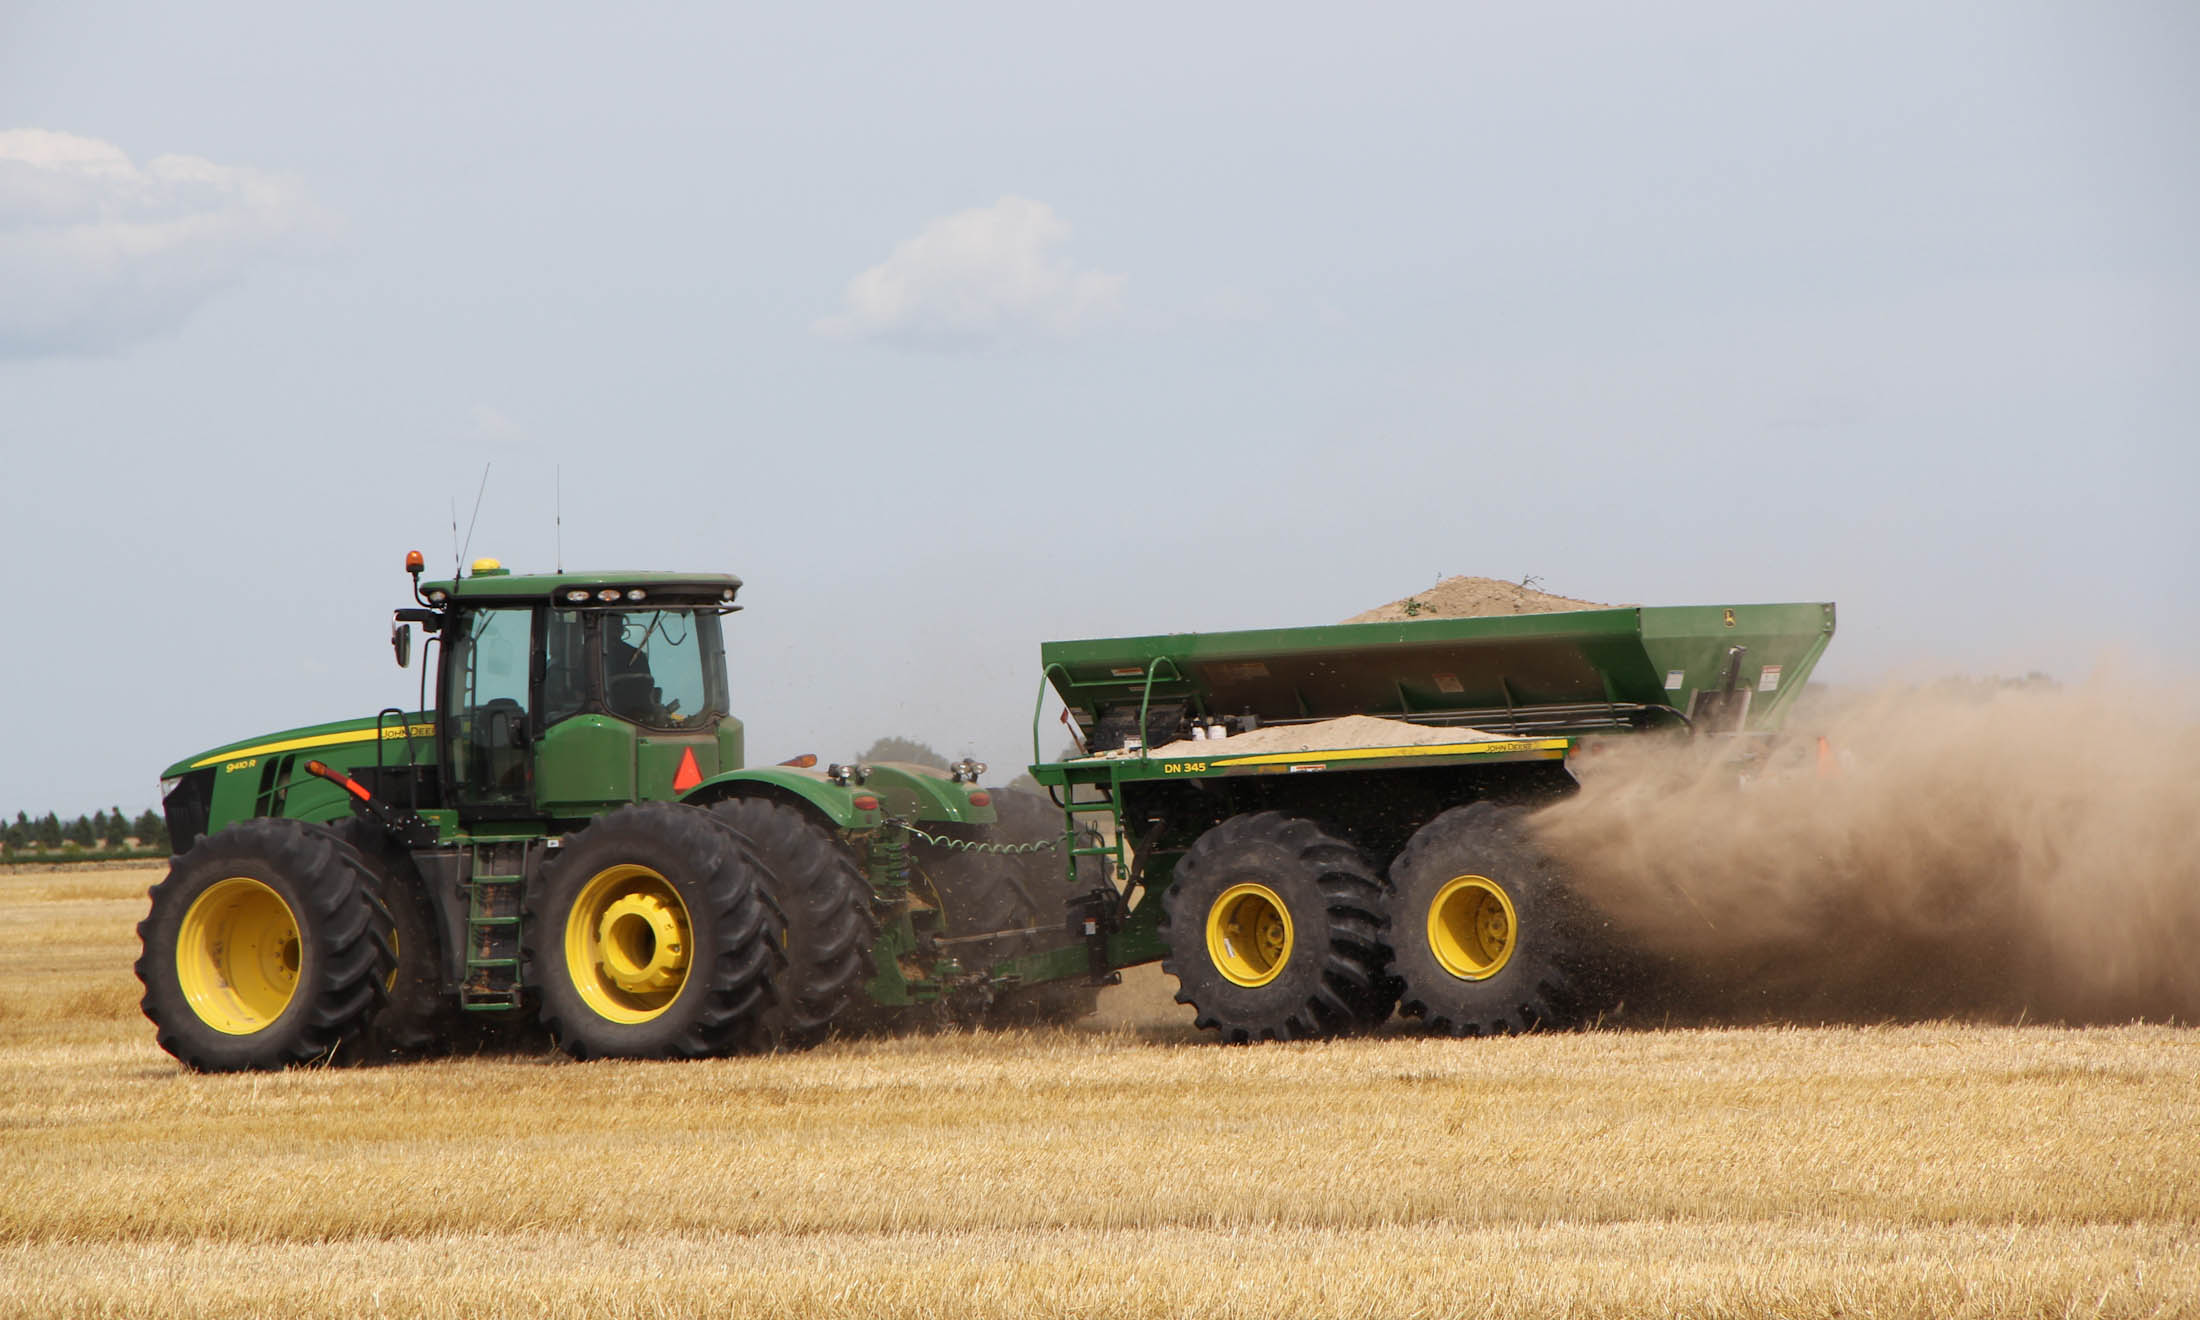 Rock dust and lime spreading on fields (Image: John Deere/Max Pixels)